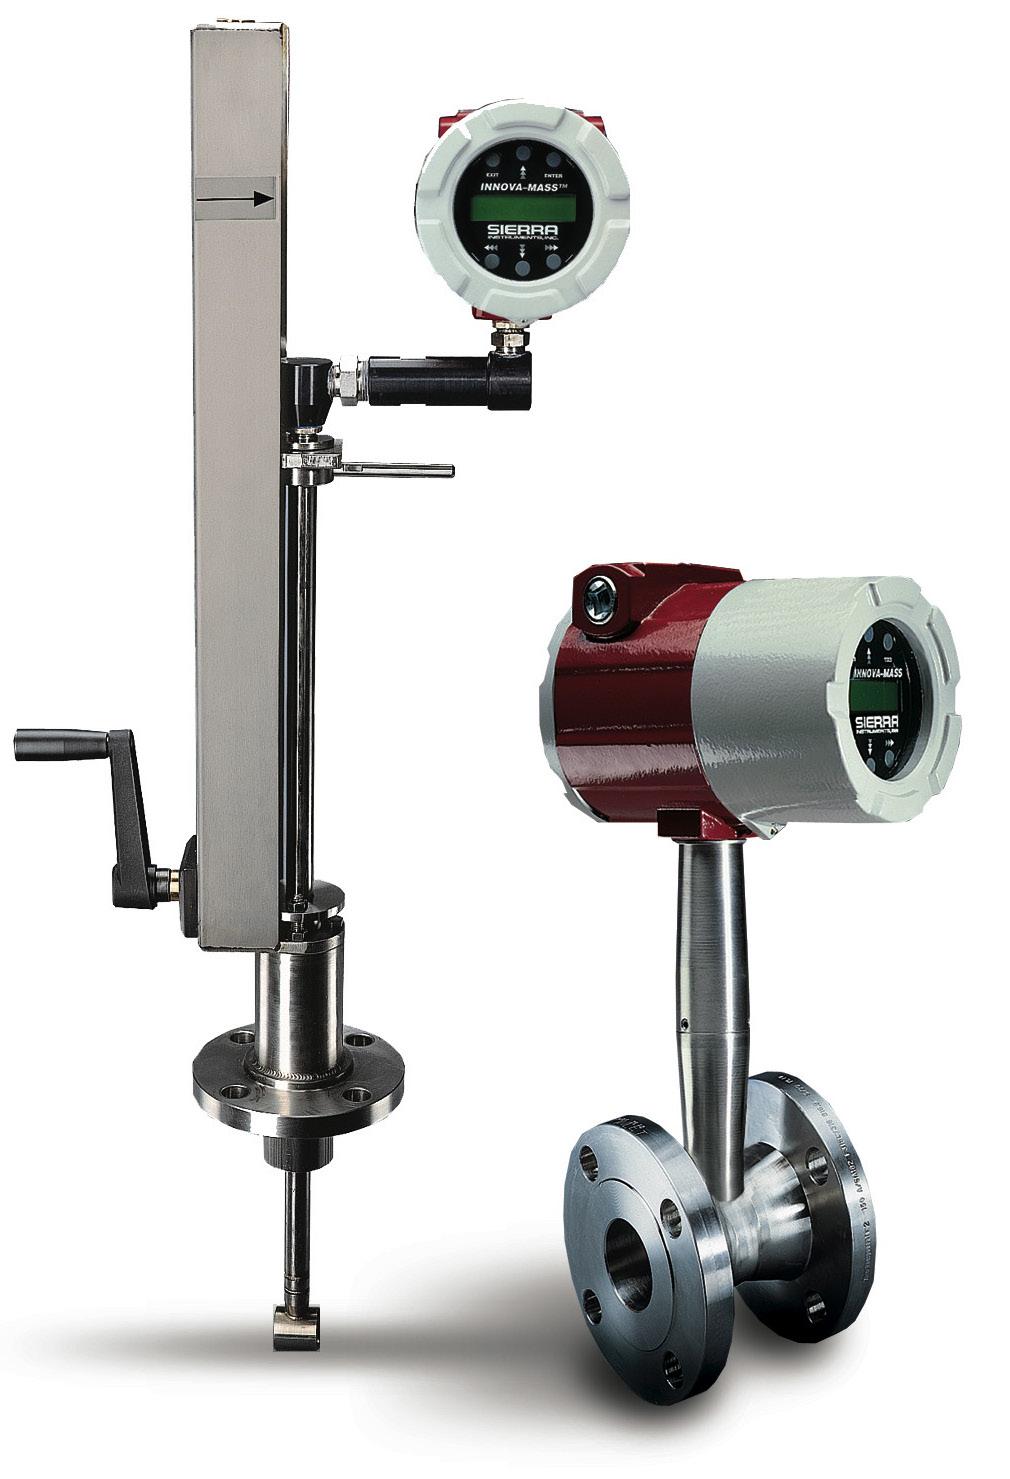 Multivariable Mass Vortex Flow Meter FEATURES Mass and volumetric flow measurement of gas, liquid, and steam Multivariable outputs for five process parameters: mass flow rate volumetric flow rate